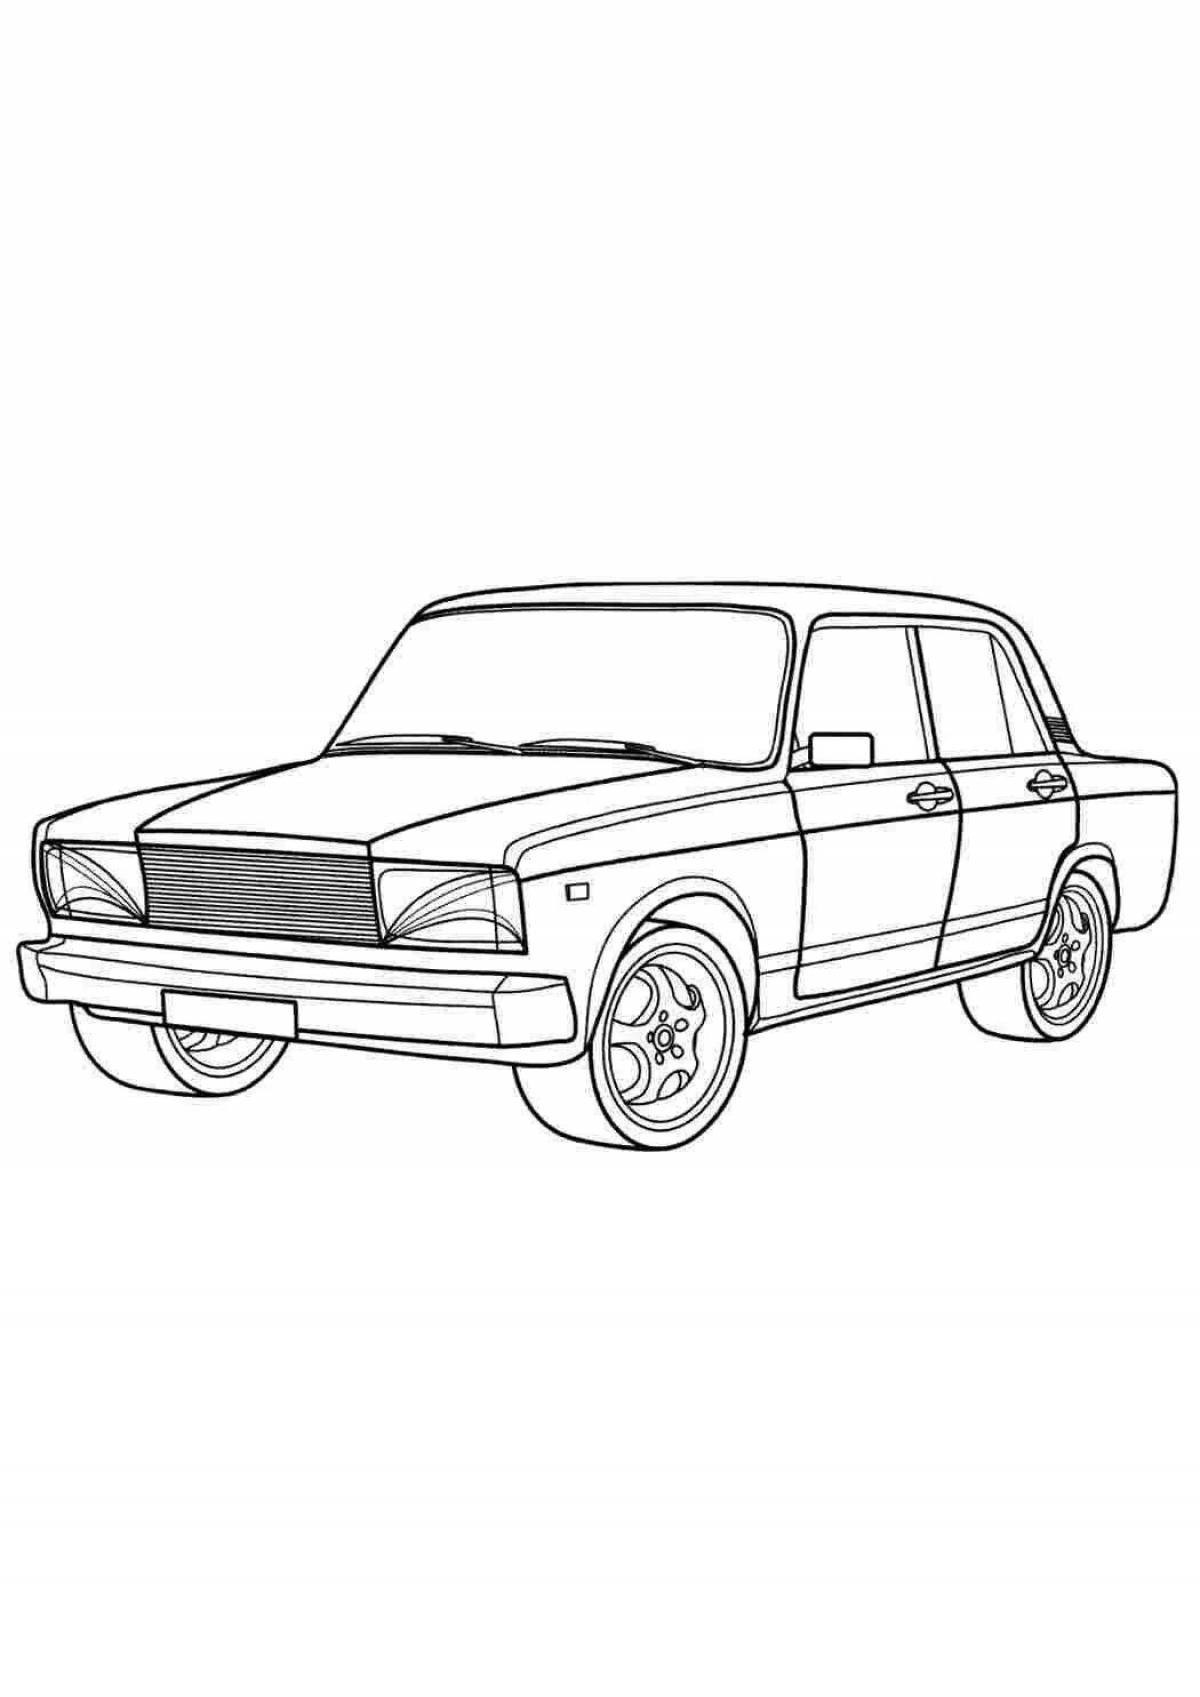 Grand zhiguli tuned coloring pages